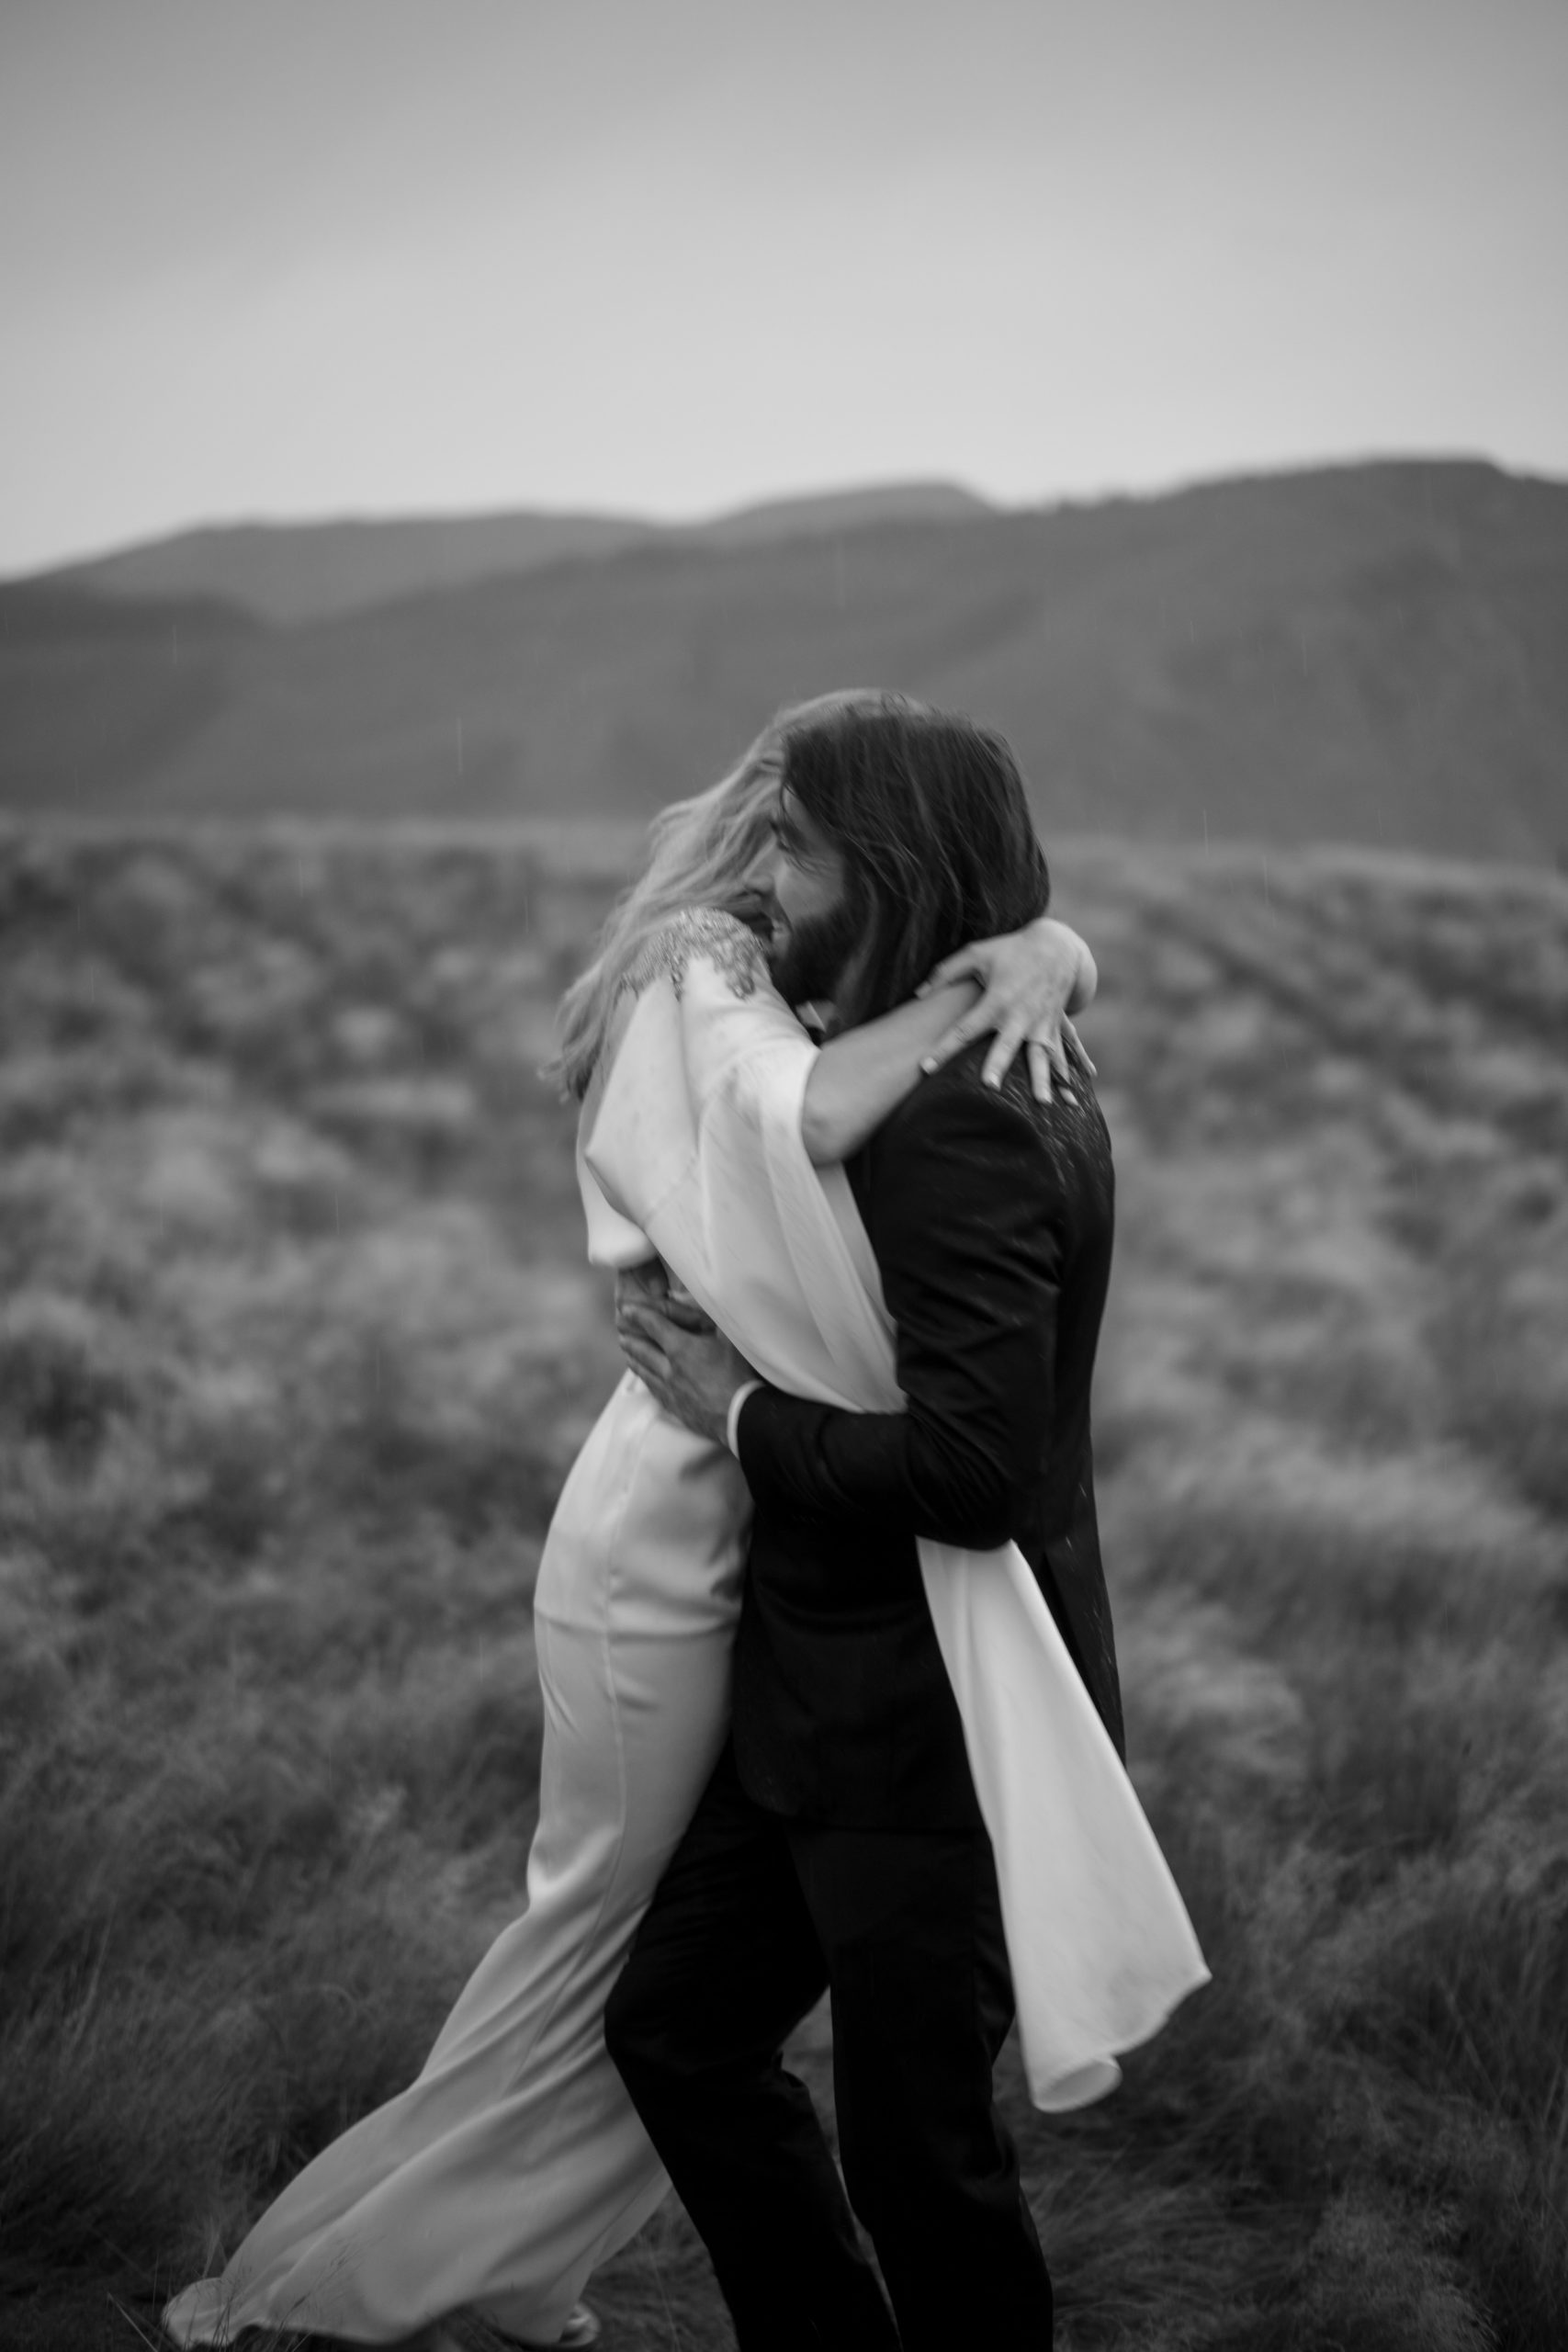 New Zealand Wedding Photoshoot in the mountains.